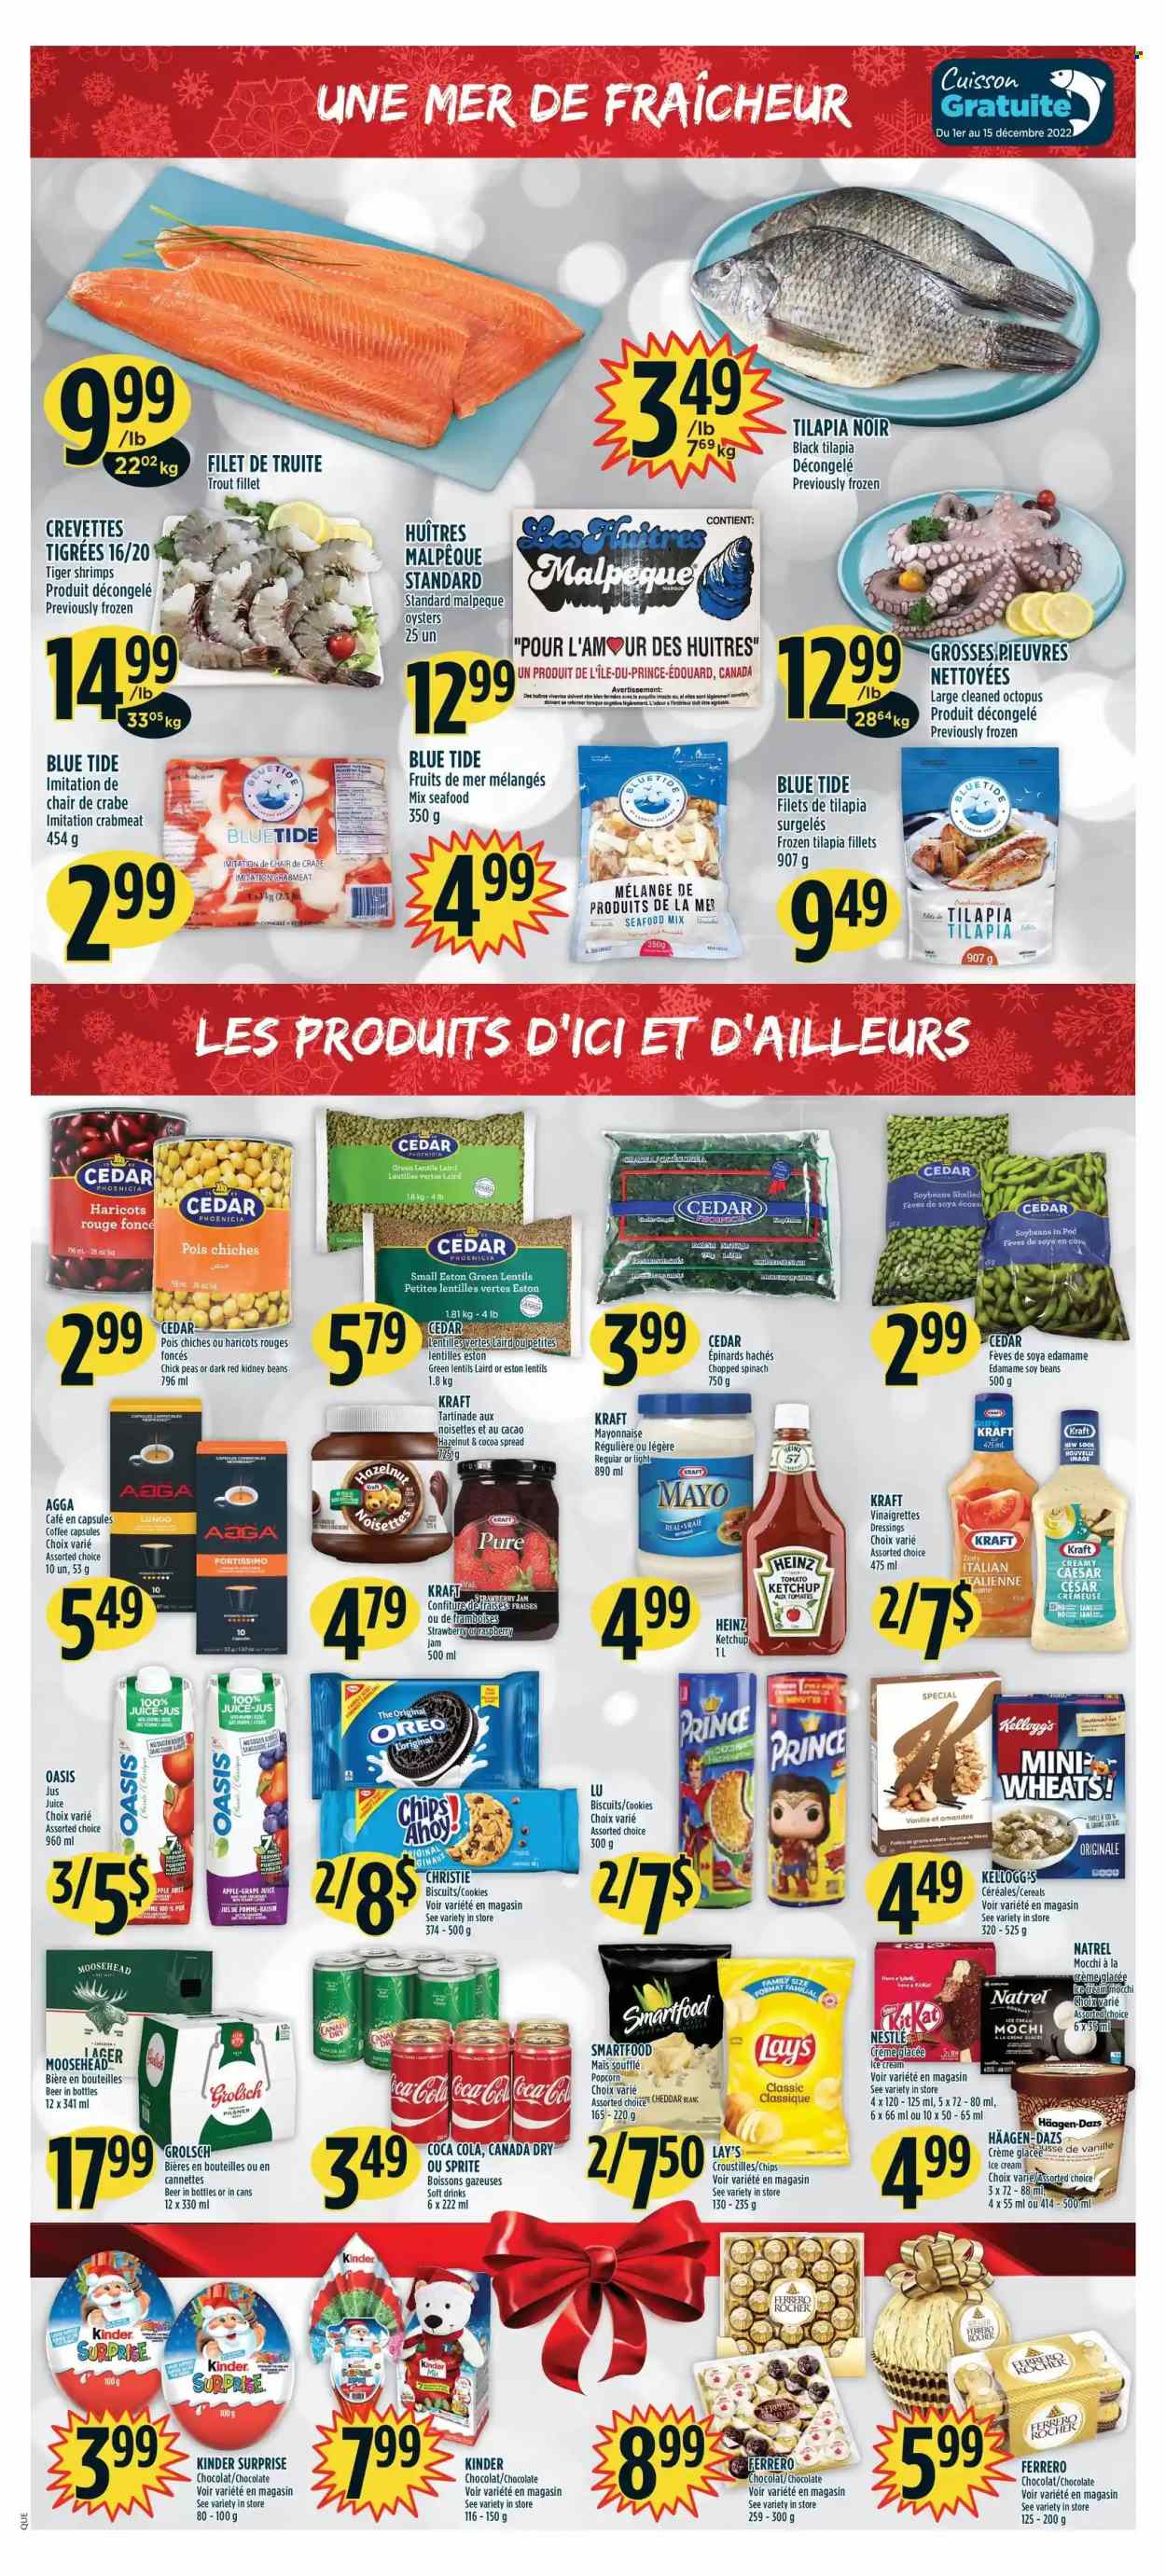 thumbnail - Adonis Flyer - December 01, 2022 - December 07, 2022 - Sales products - Edamame, spinach, peas, cod, crab meat, tilapia, trout, octopus, oysters, seafood, shrimps, Kraft®, cheese, mayonnaise, ice cream, Häagen-Dazs, cookies, Kinder Surprise, KitKat, Kellogg's, biscuit, Chips Ahoy!, Lay’s, Smartfood, popcorn, cocoa, lentils, strawberry jam, kidney beans, cereals, soybeans, raspberry jam, fruit jam, Canada Dry, Coca-Cola, Sprite, juice, soft drink, coffee capsules, beer, Grolsch, Lager, Tide, Nestlé, Heinz, ketchup, Oreo, Ferrero Rocher. Page 4.